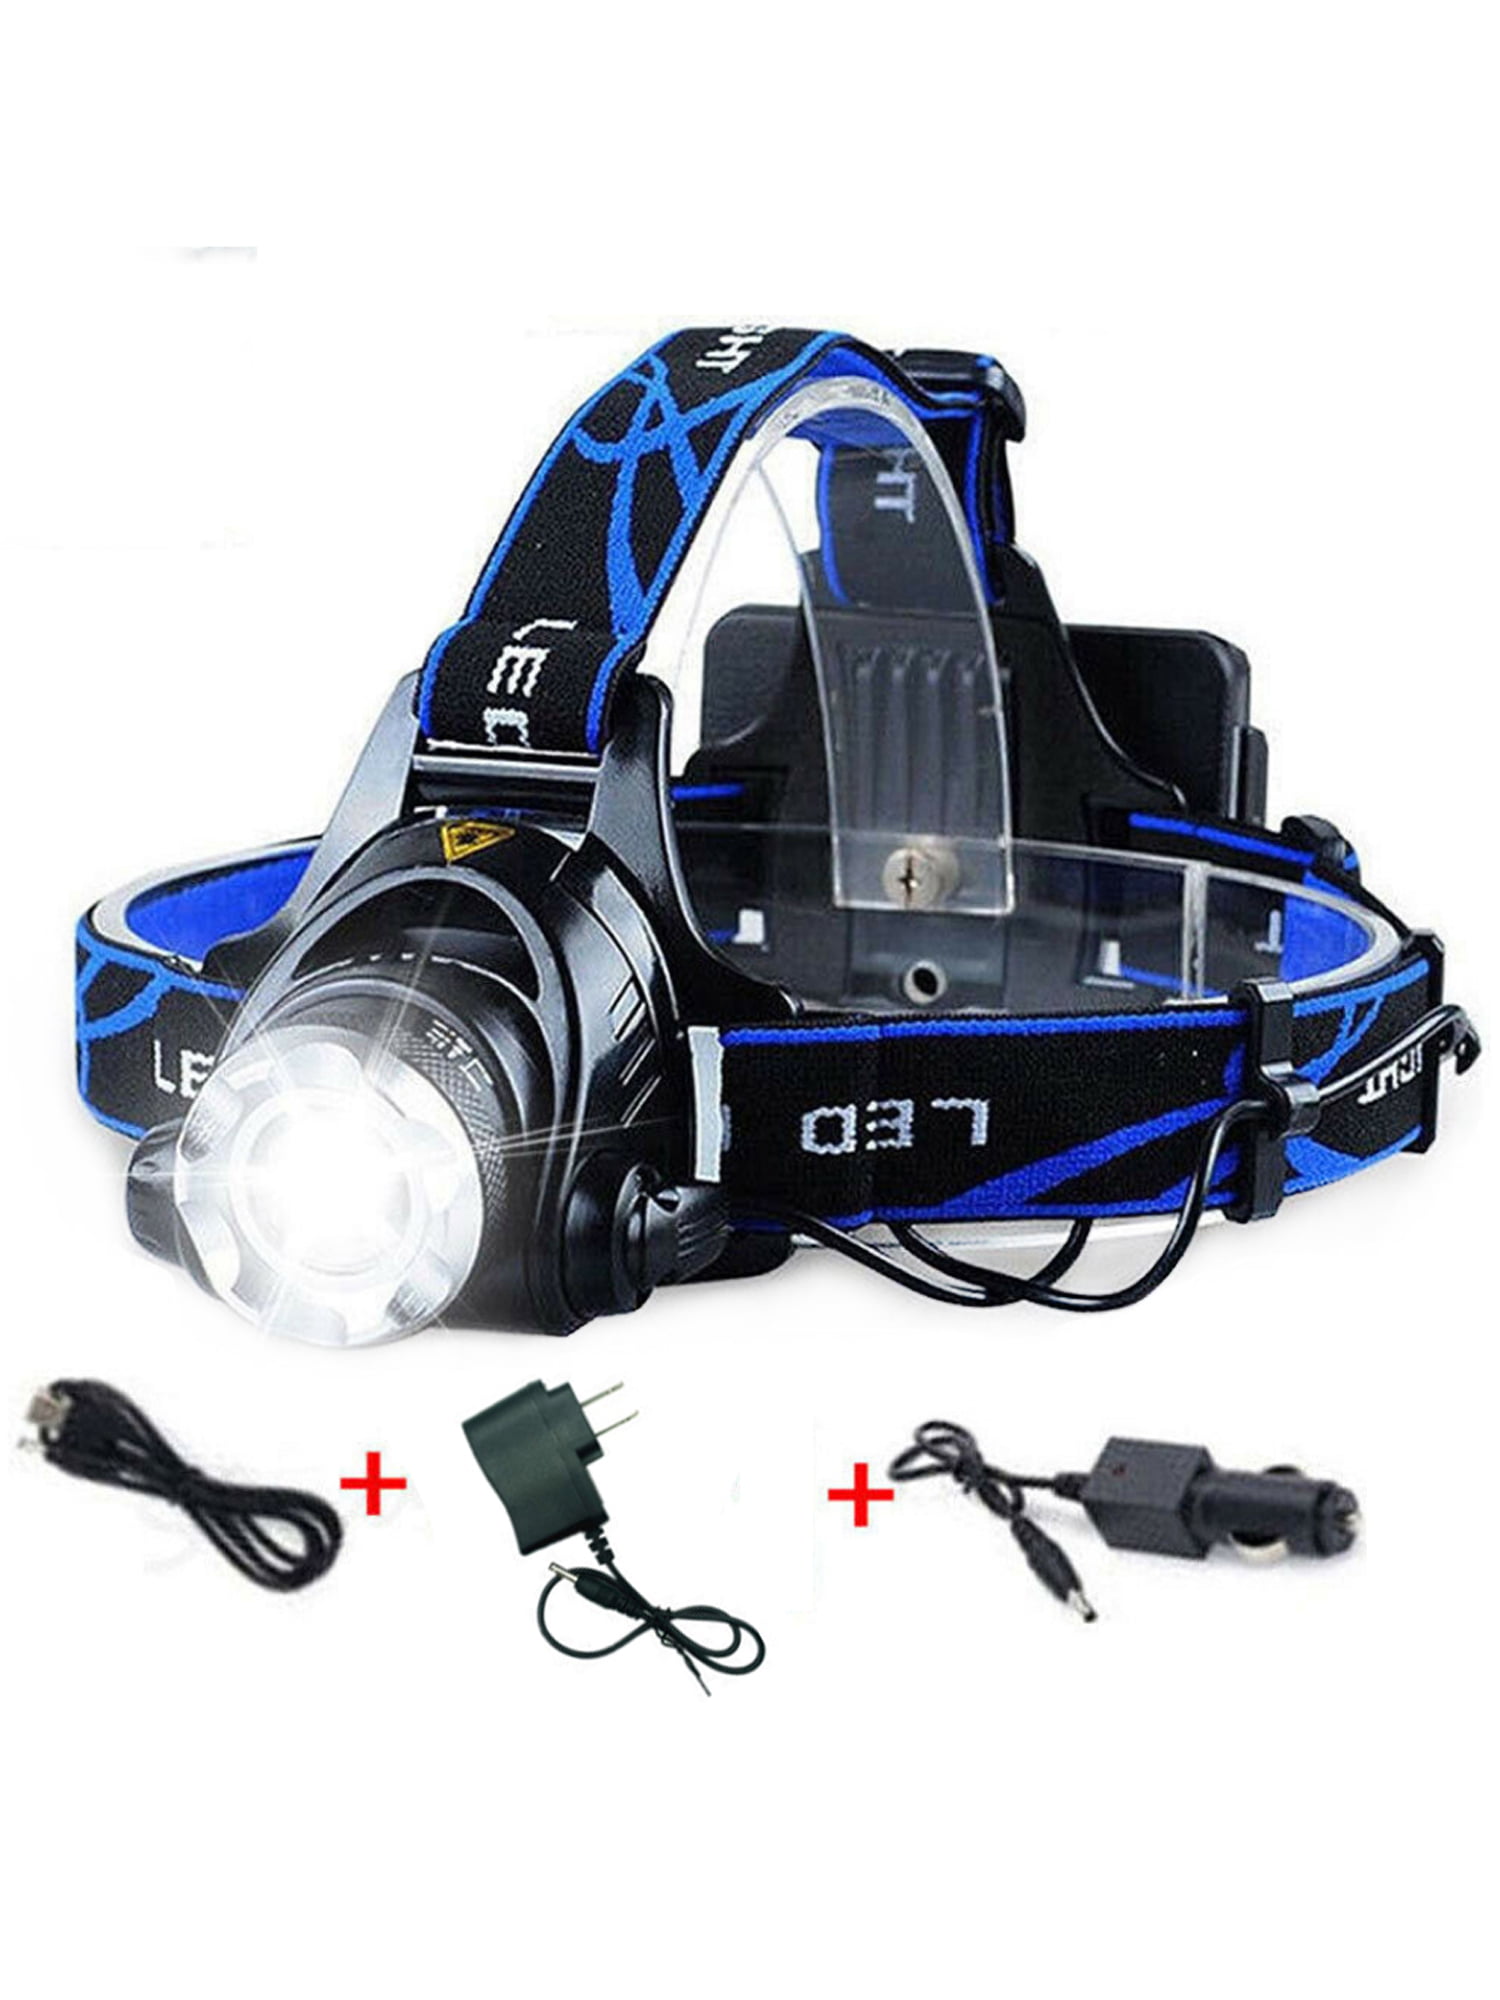 Details about  / 990000LM Rechargeable LED Head Torch Light Headlamp Waterproof /& Charger Set